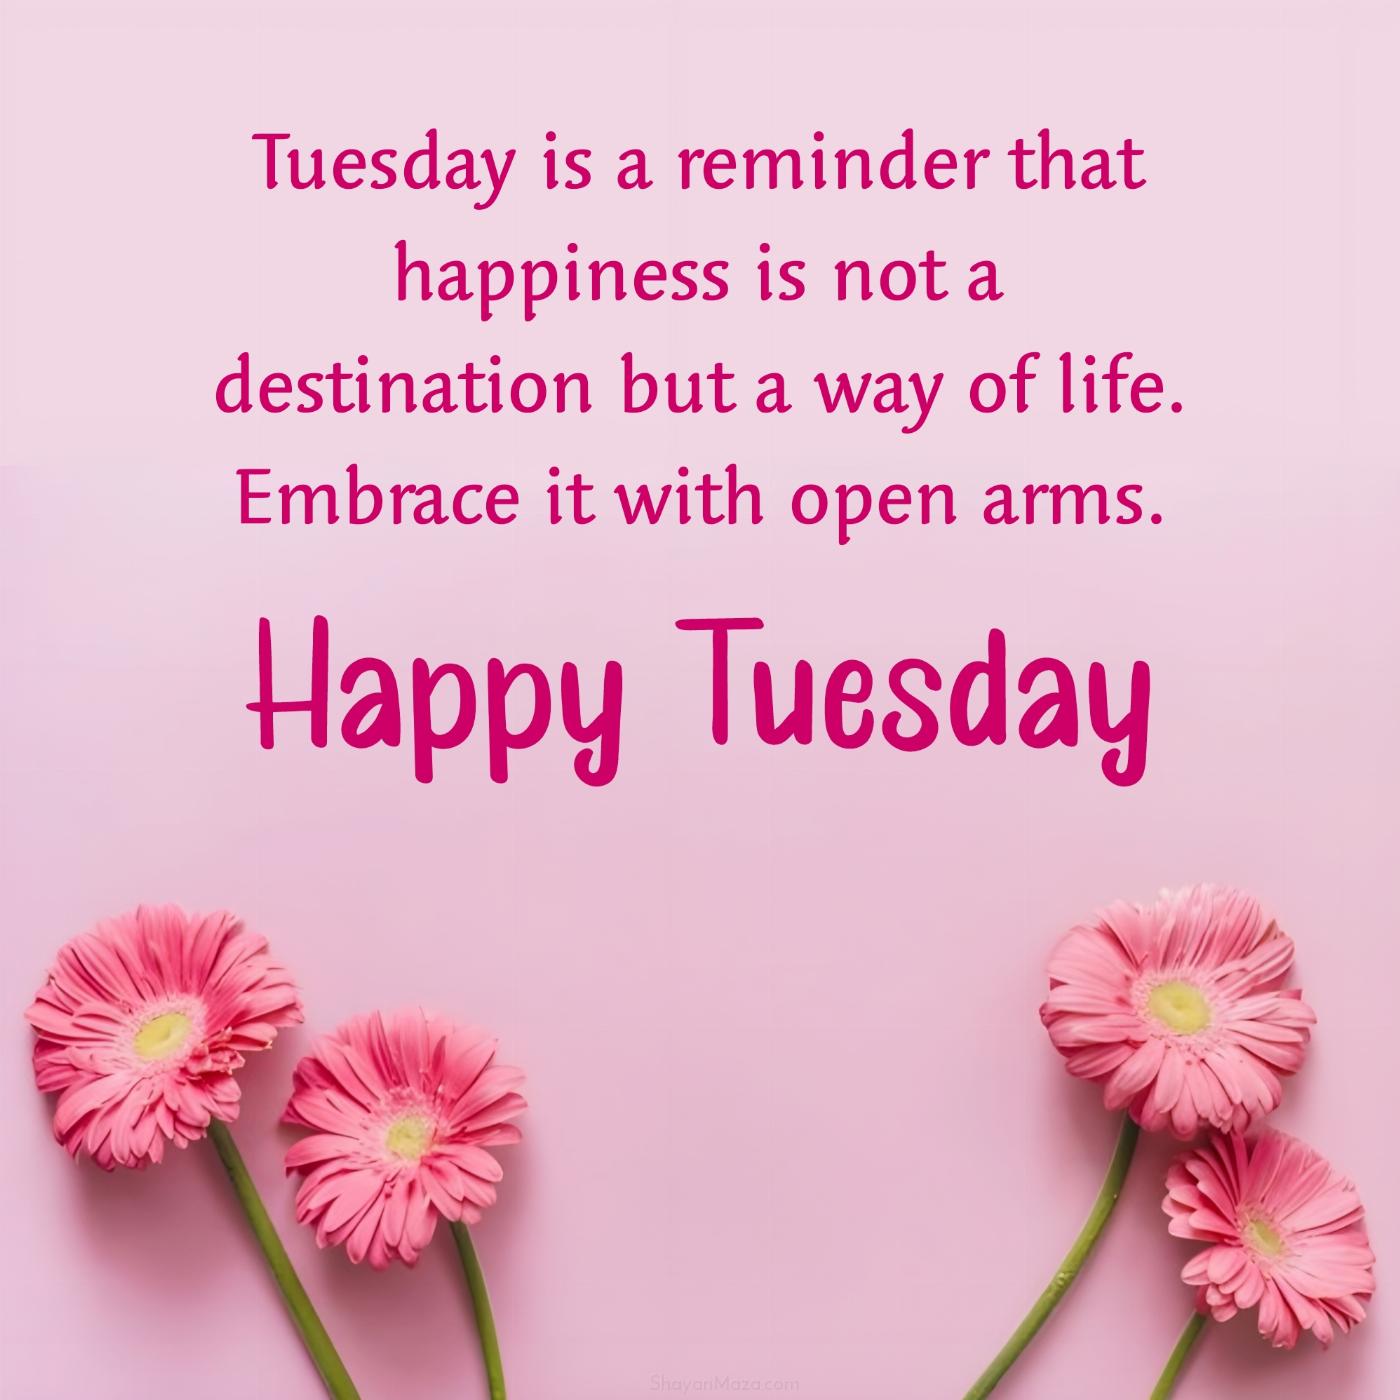 Tuesday is a reminder that happiness is not a destination